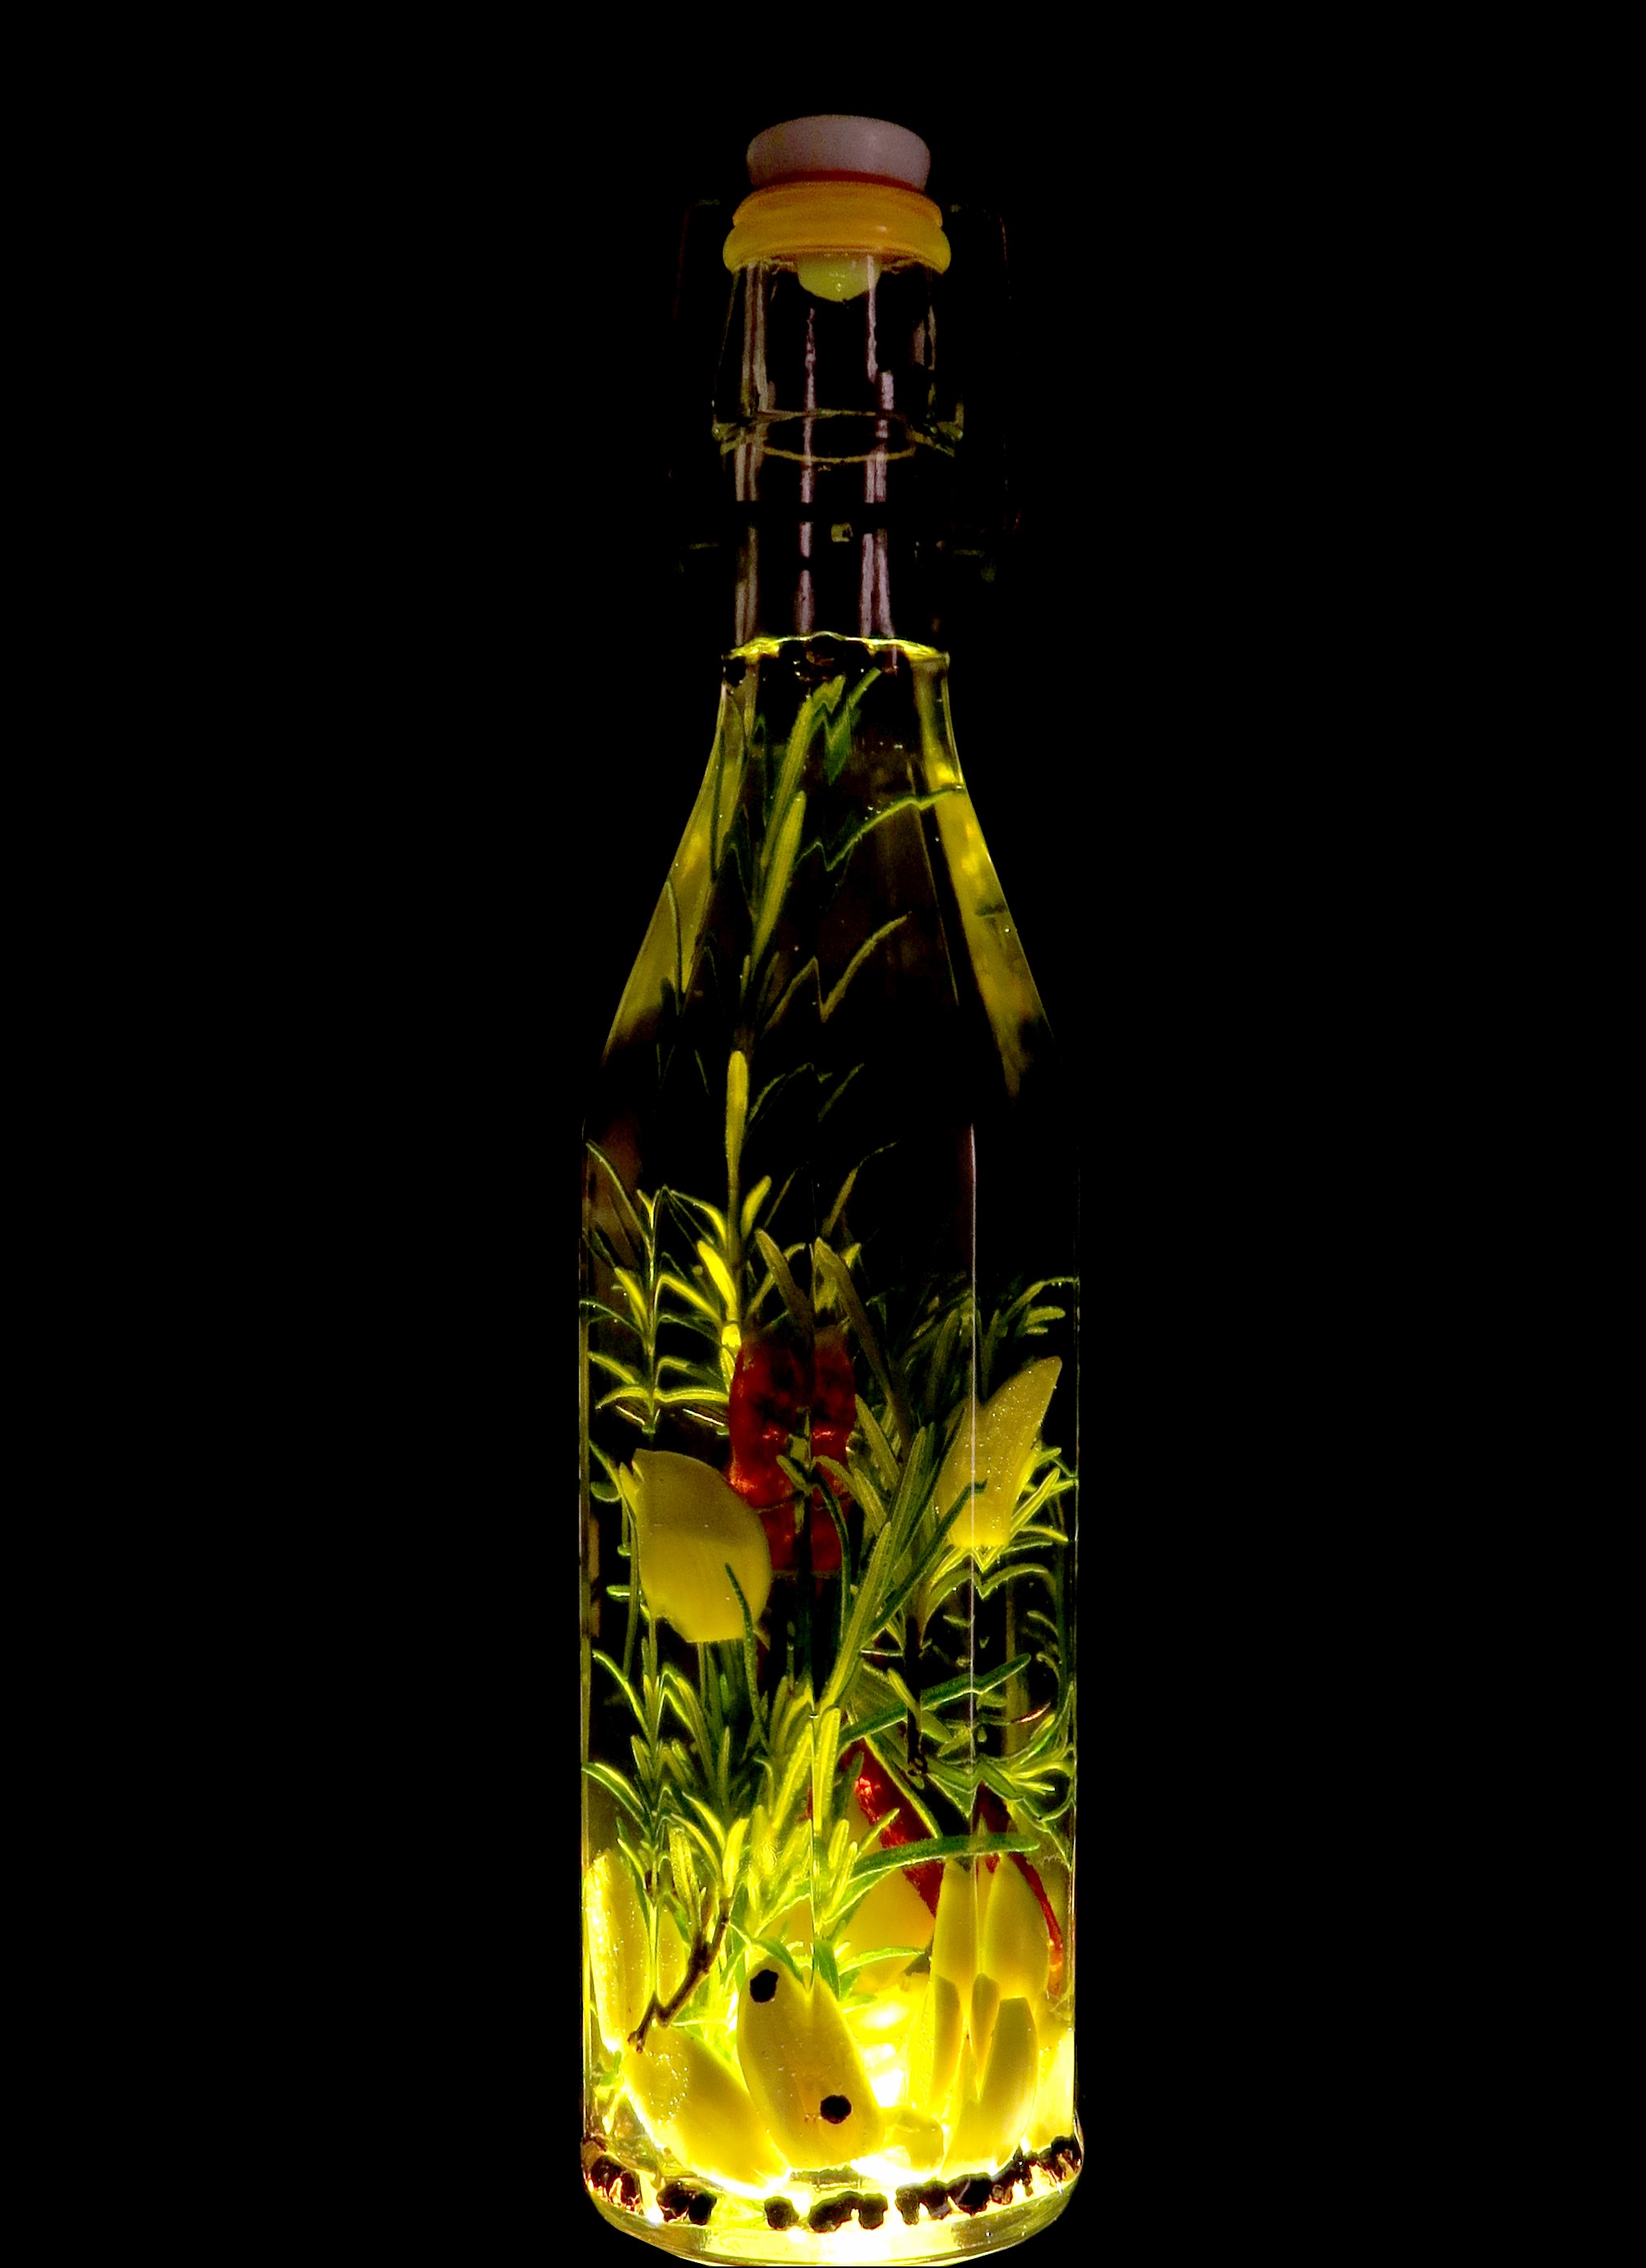 Bottle of oil with herbs inside on a black background.